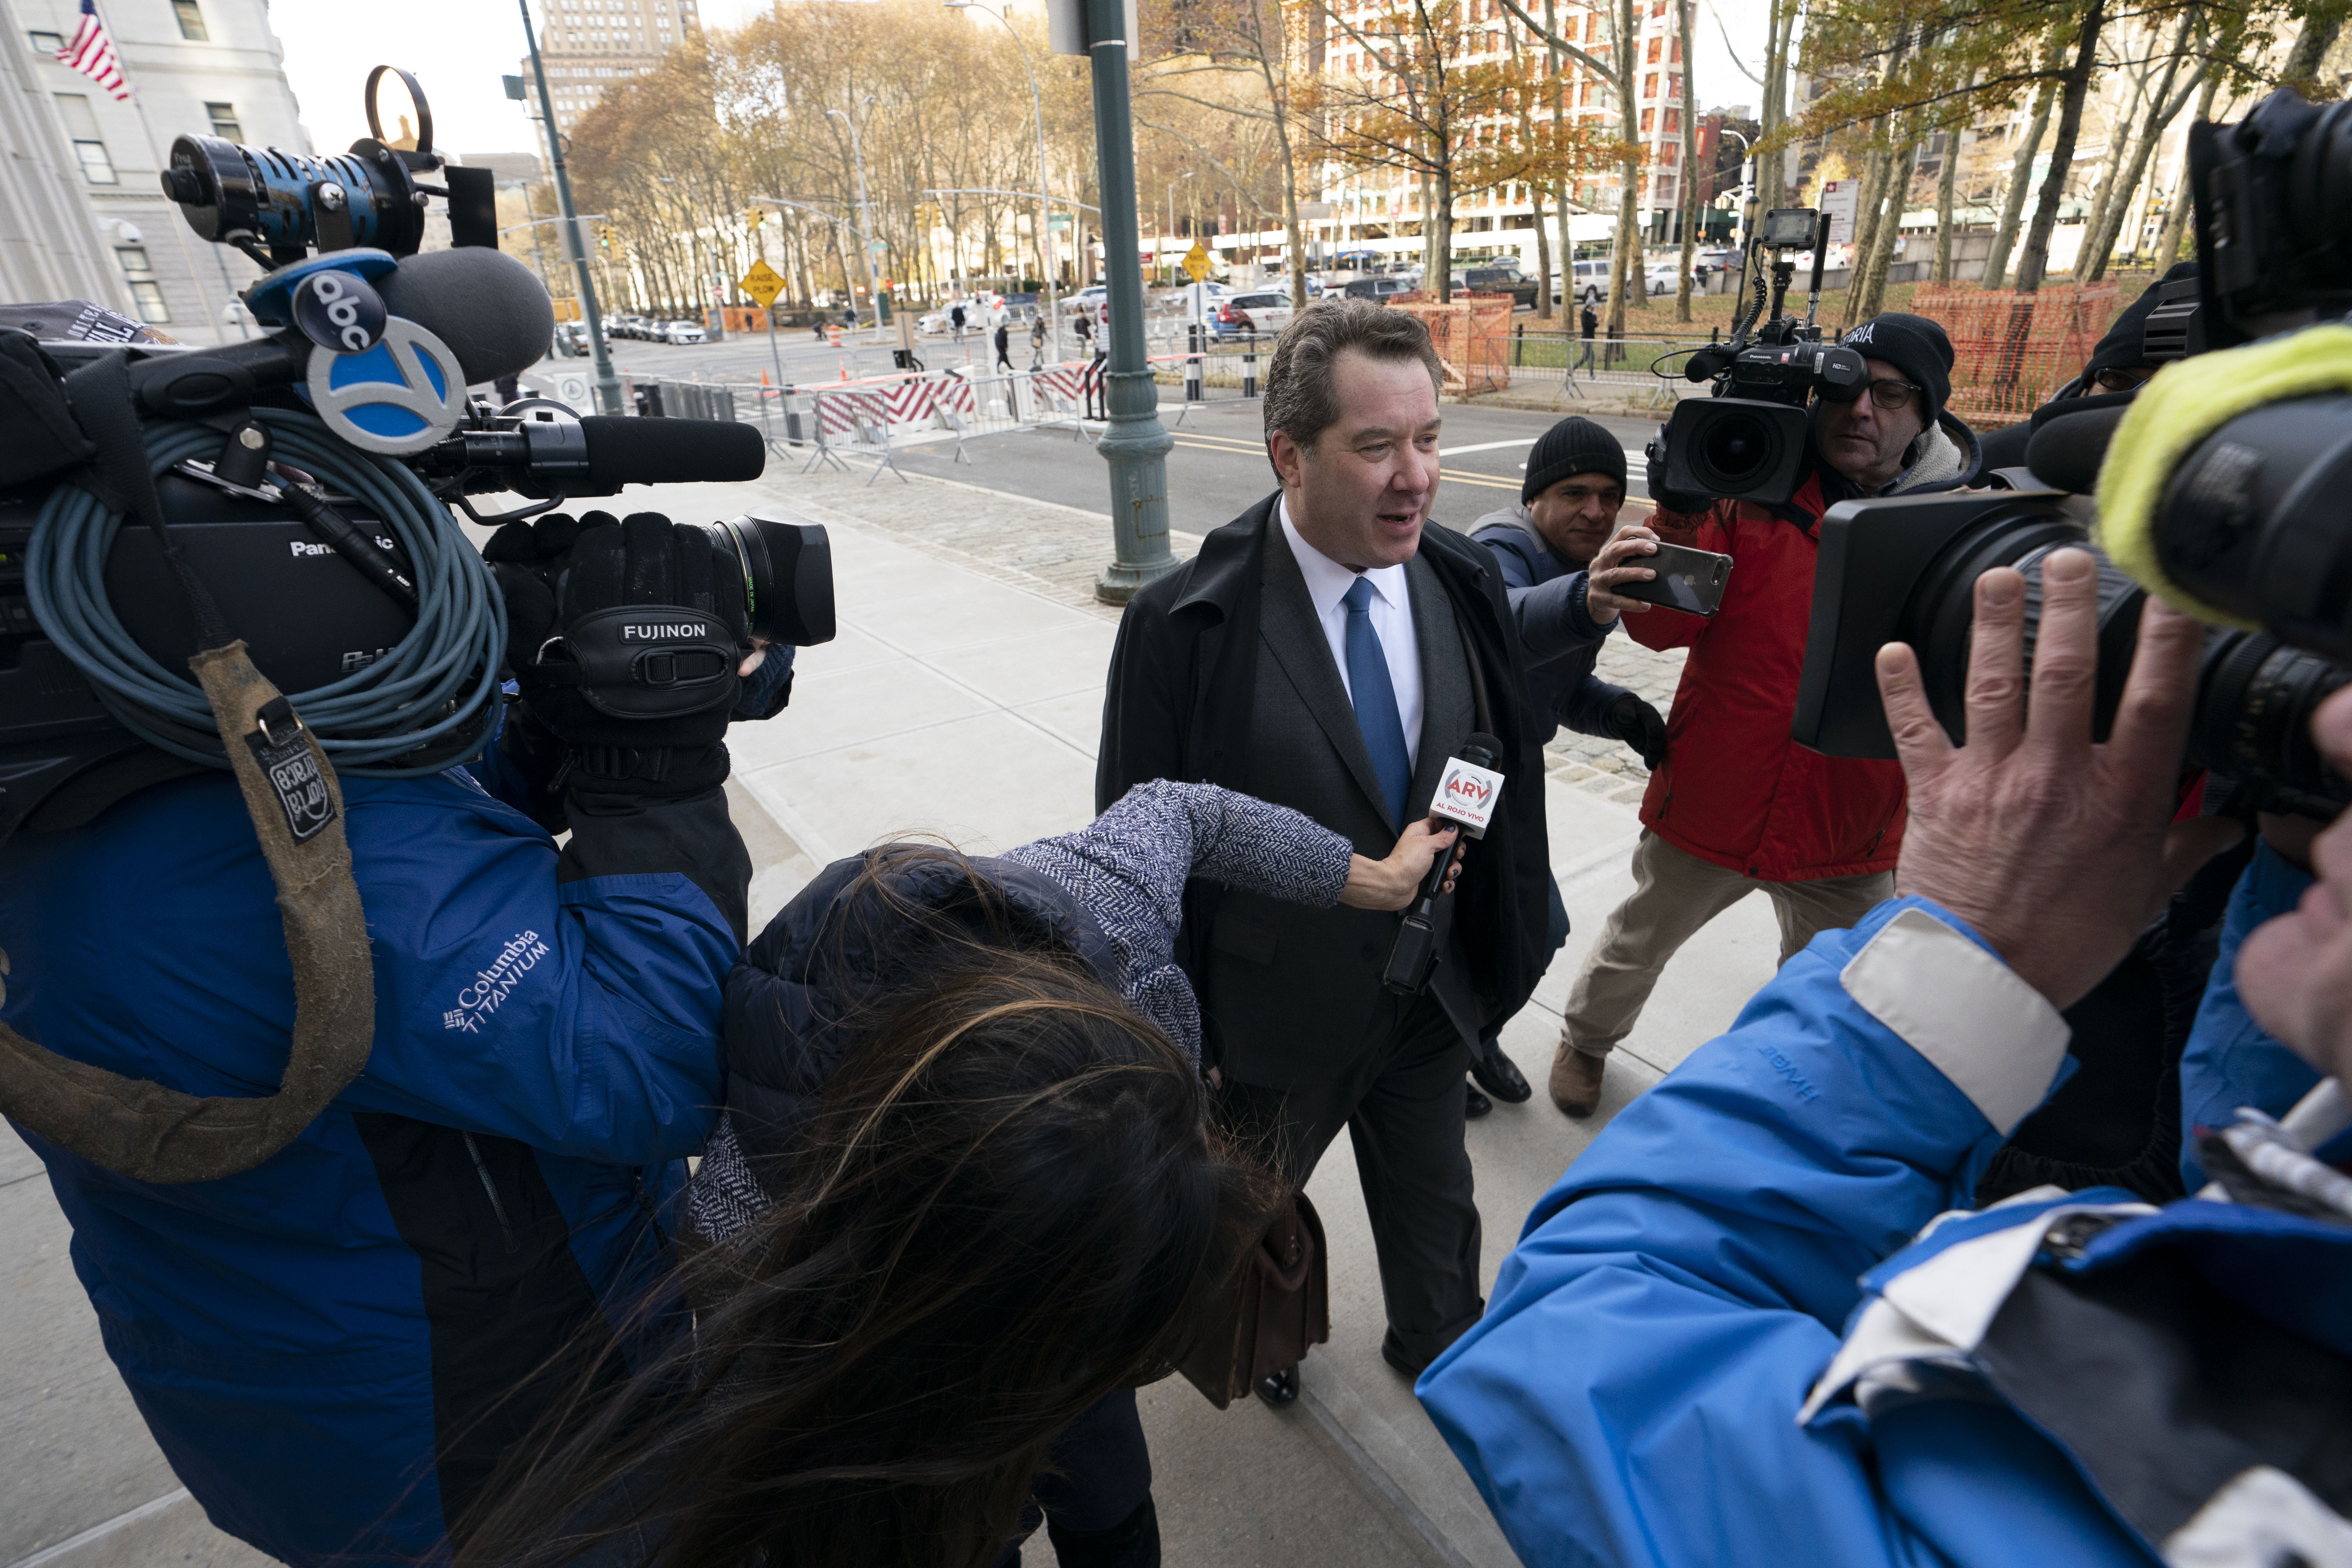 Attorney for Joaquin "El Chapo" Guzman, Jeffrey Lichtman , arrives at the Brooklyn Federal Courthouse as the trial of Joaquin "El Chapo" Guzman takes place inside November 14, 2018 in New York. DON EMMERT/AFP/Getty Images